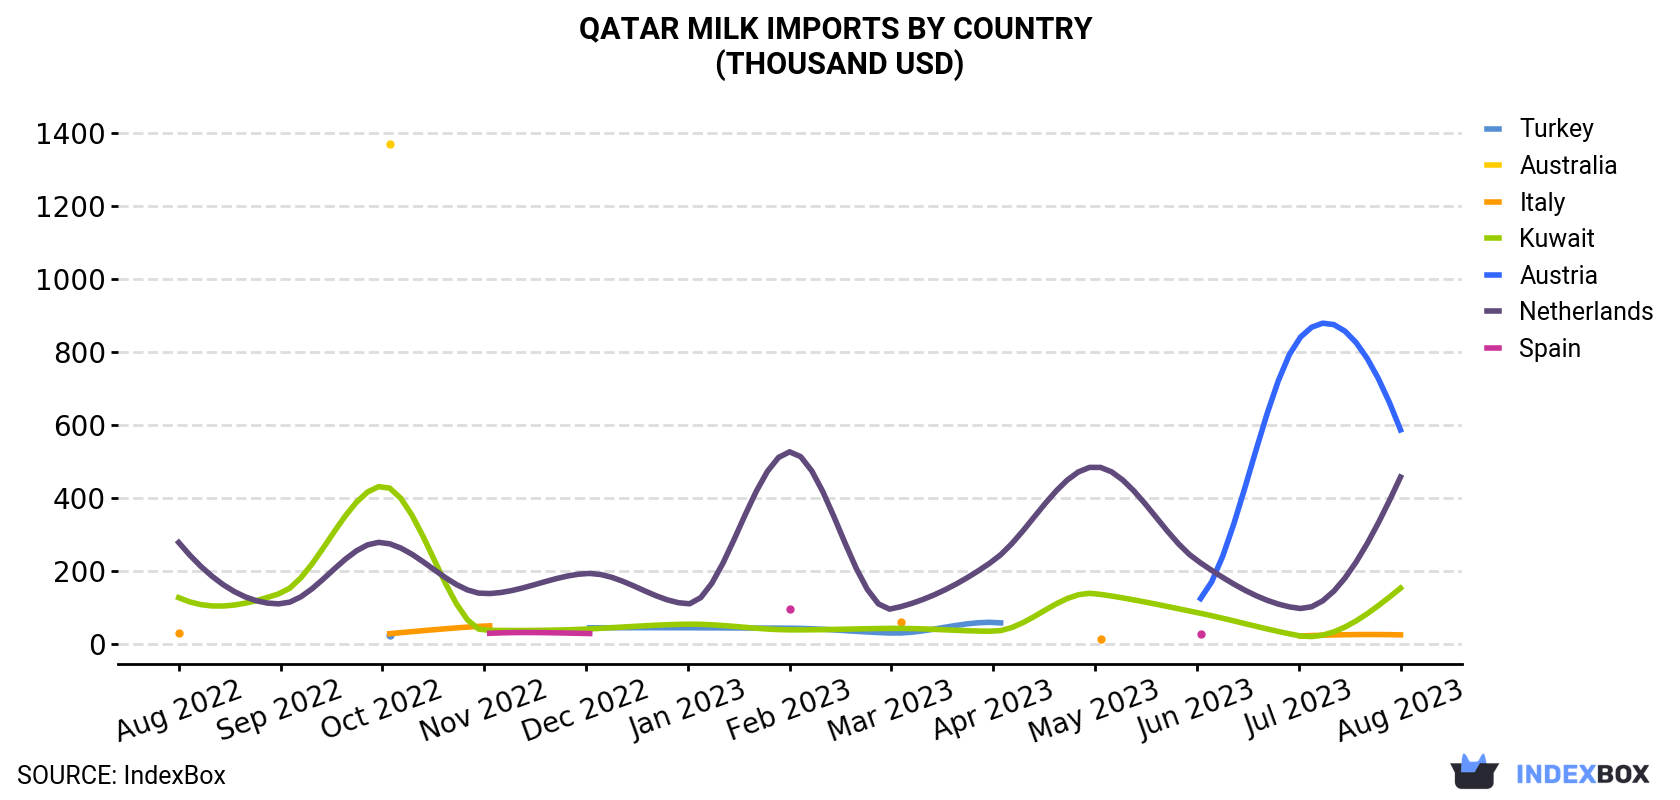 Qatar Milk Imports By Country (Thousand USD)